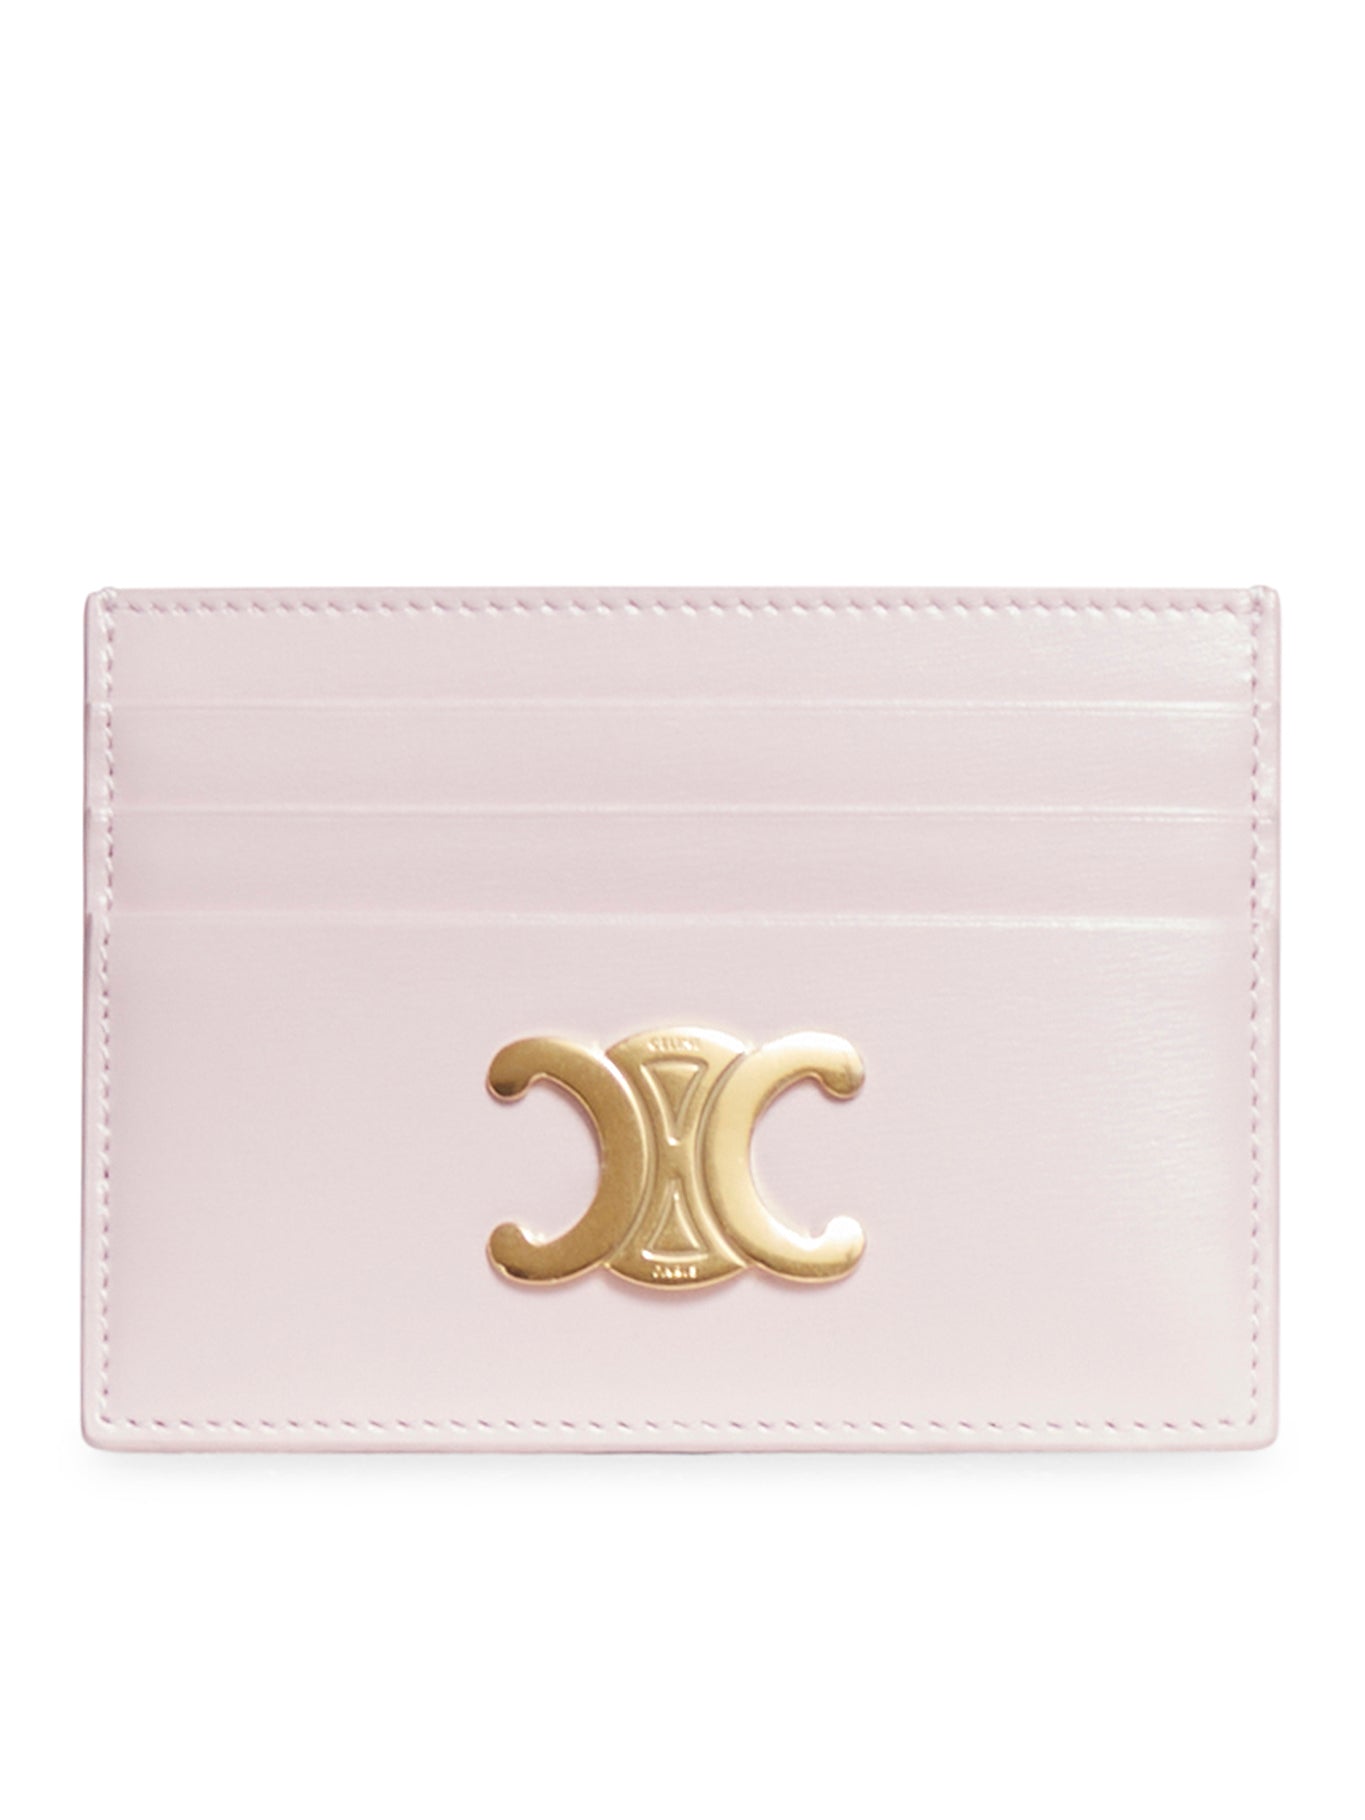 TRIOMPHE CARD HOLDER IN PASTEL PINK POLISHED CALF LEATHER